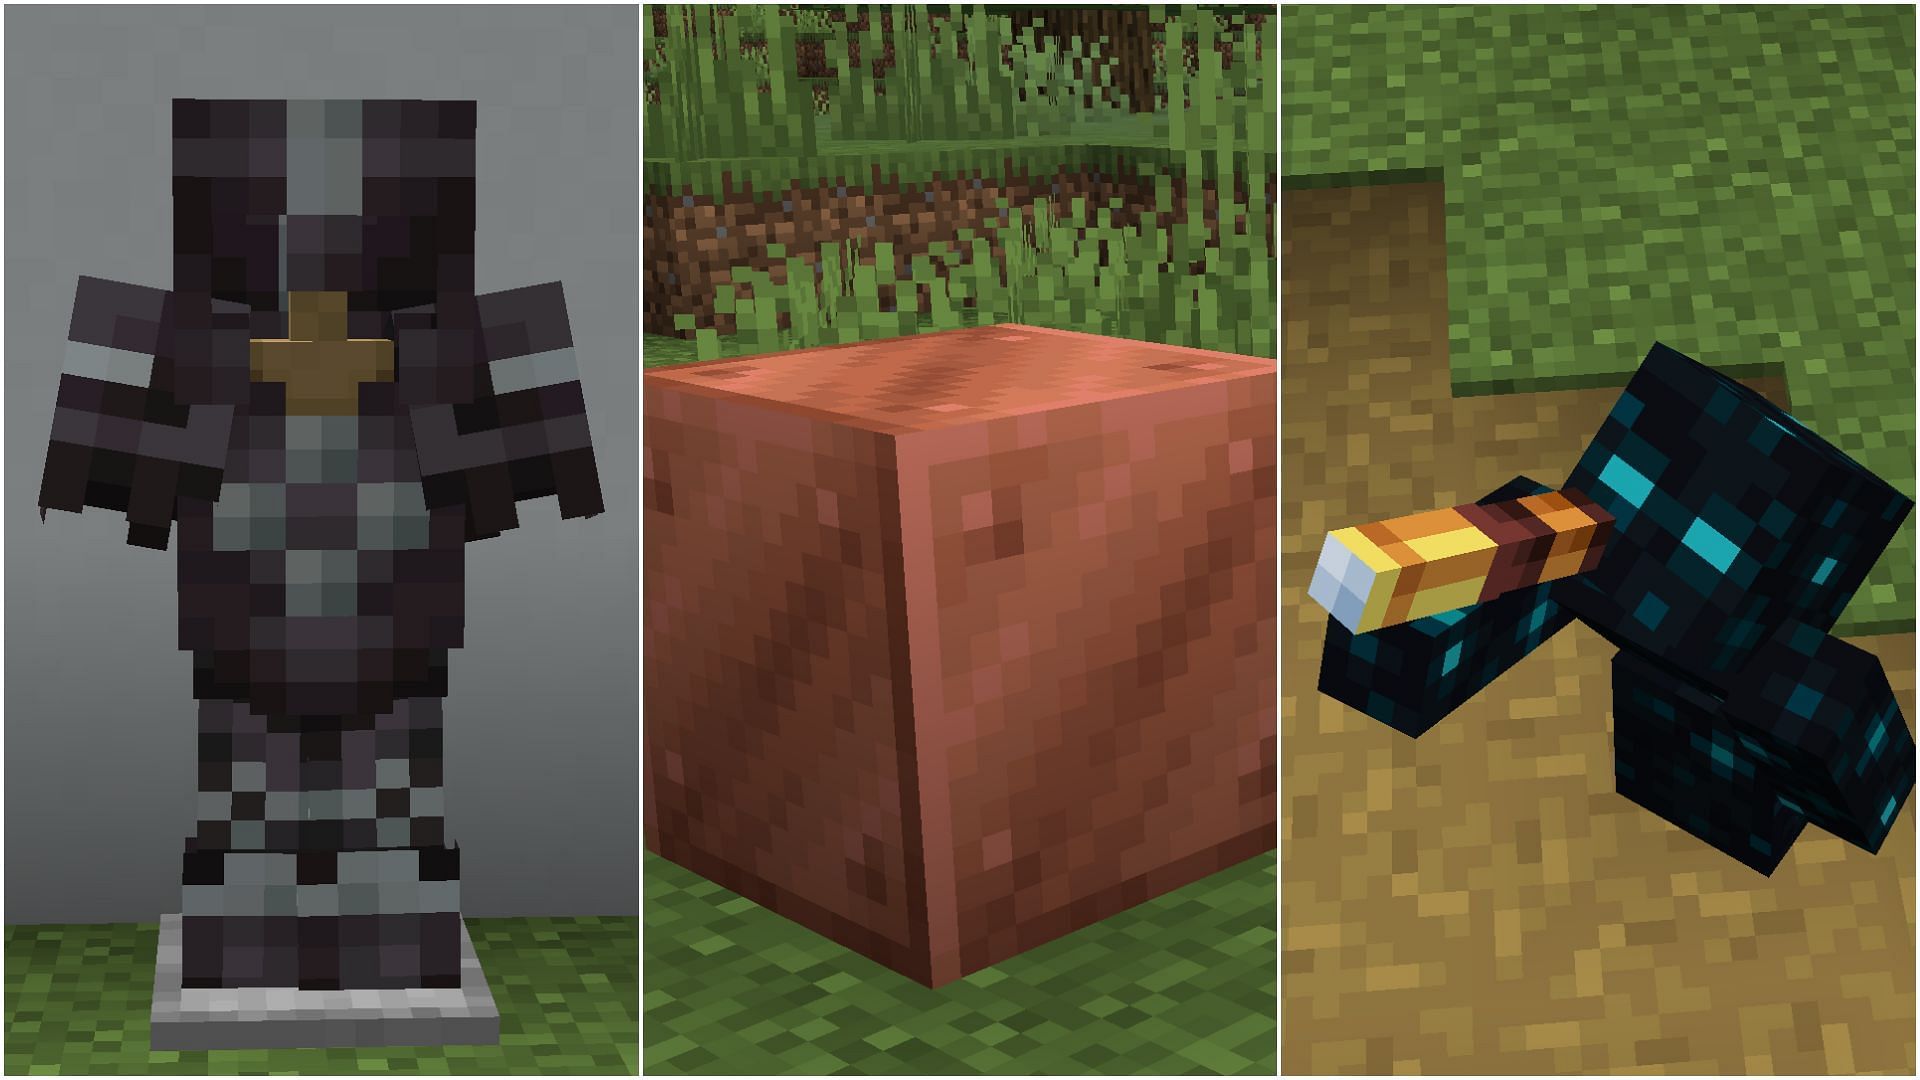 Copper can be used to craft several items and build structures in Minecraft (Image via Sportskeeda)